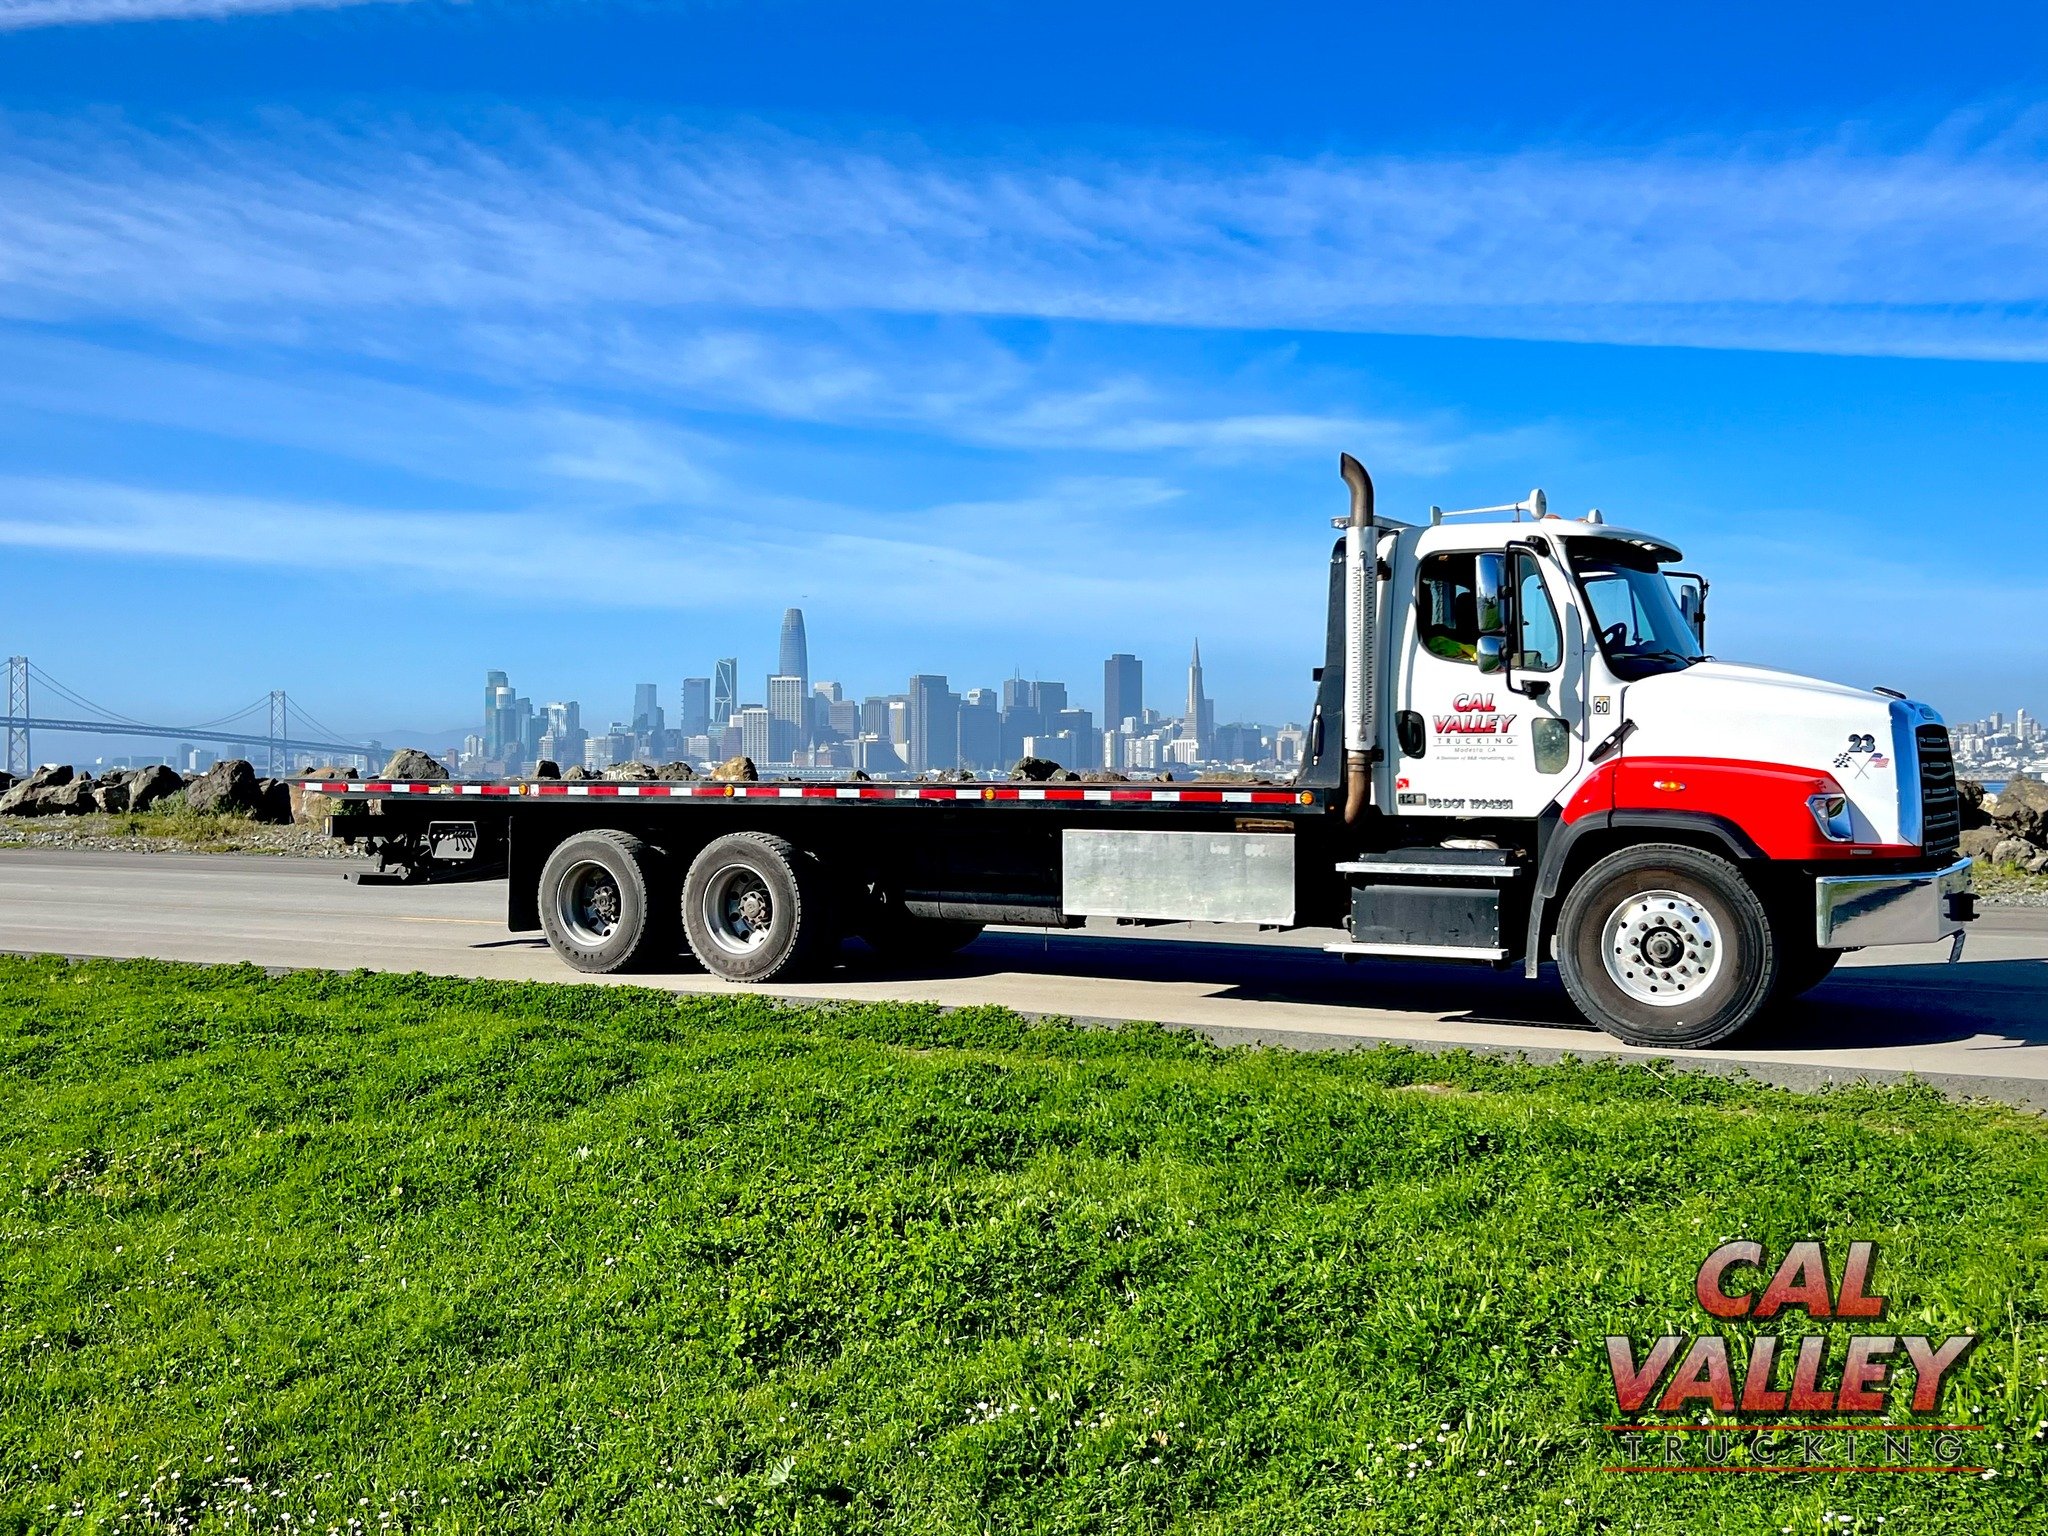 209-545-8300 is your number to call for all your hauling needs!

#calvalleytrucking #rollback #towtruck #SF #baybridge #california #trucking #lowbed #wearecalvalley